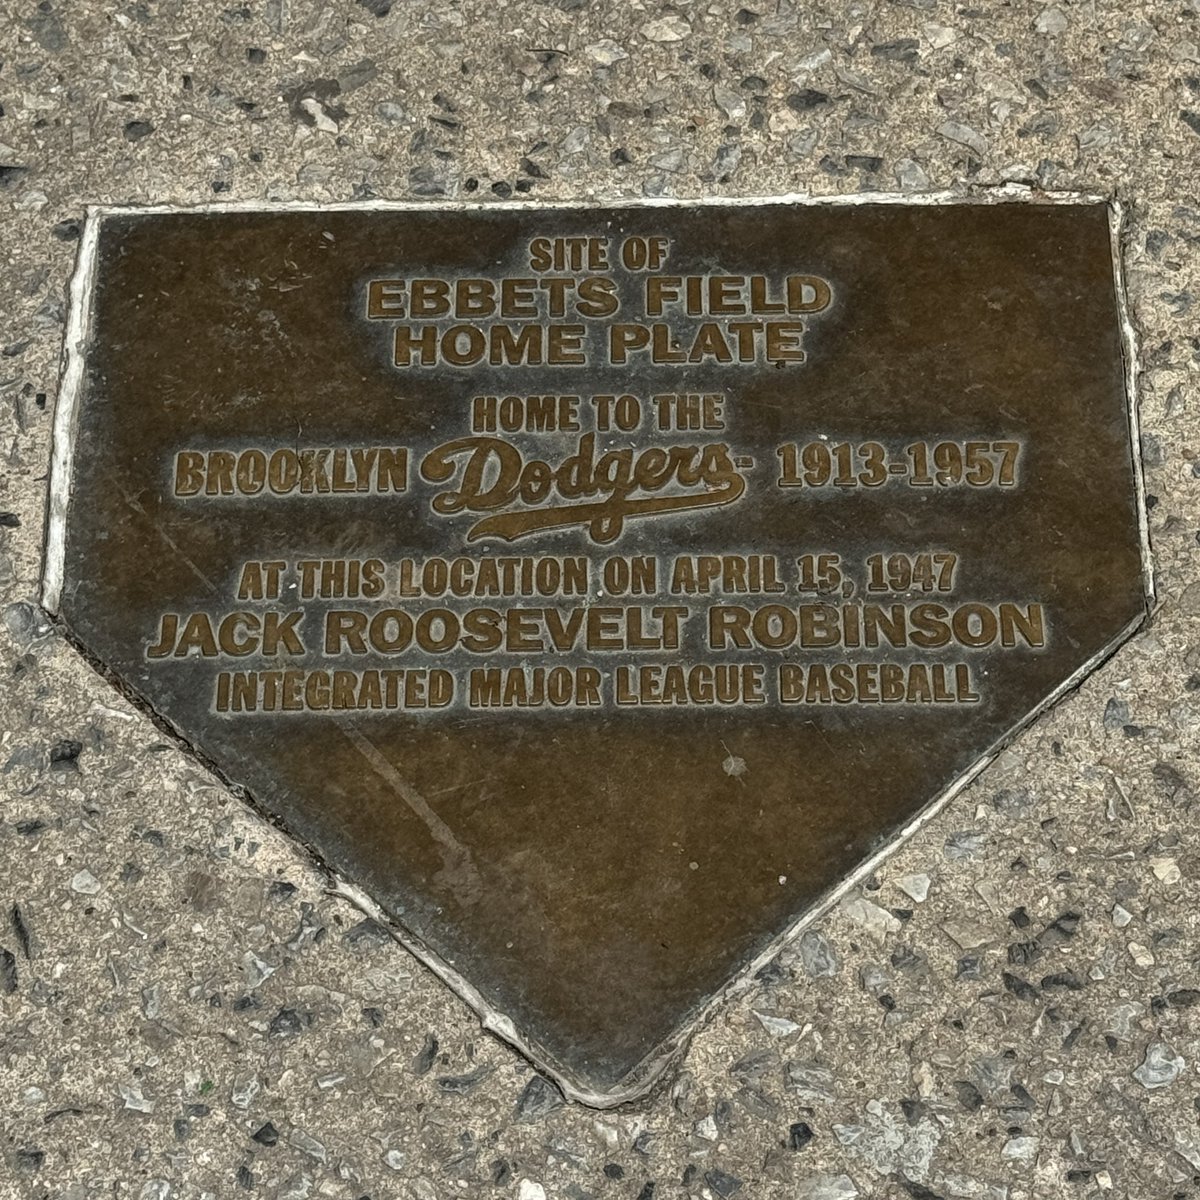 After 29 years in NYC I finally did something I’d never gotten around to: visit the Ebbets Field home plate marker. Sadly, it’s a neglected landmark, a plaque in a parking lot sidewalk outside a maintenance entrance to an unsightly apartment complex. No other signage 1/x